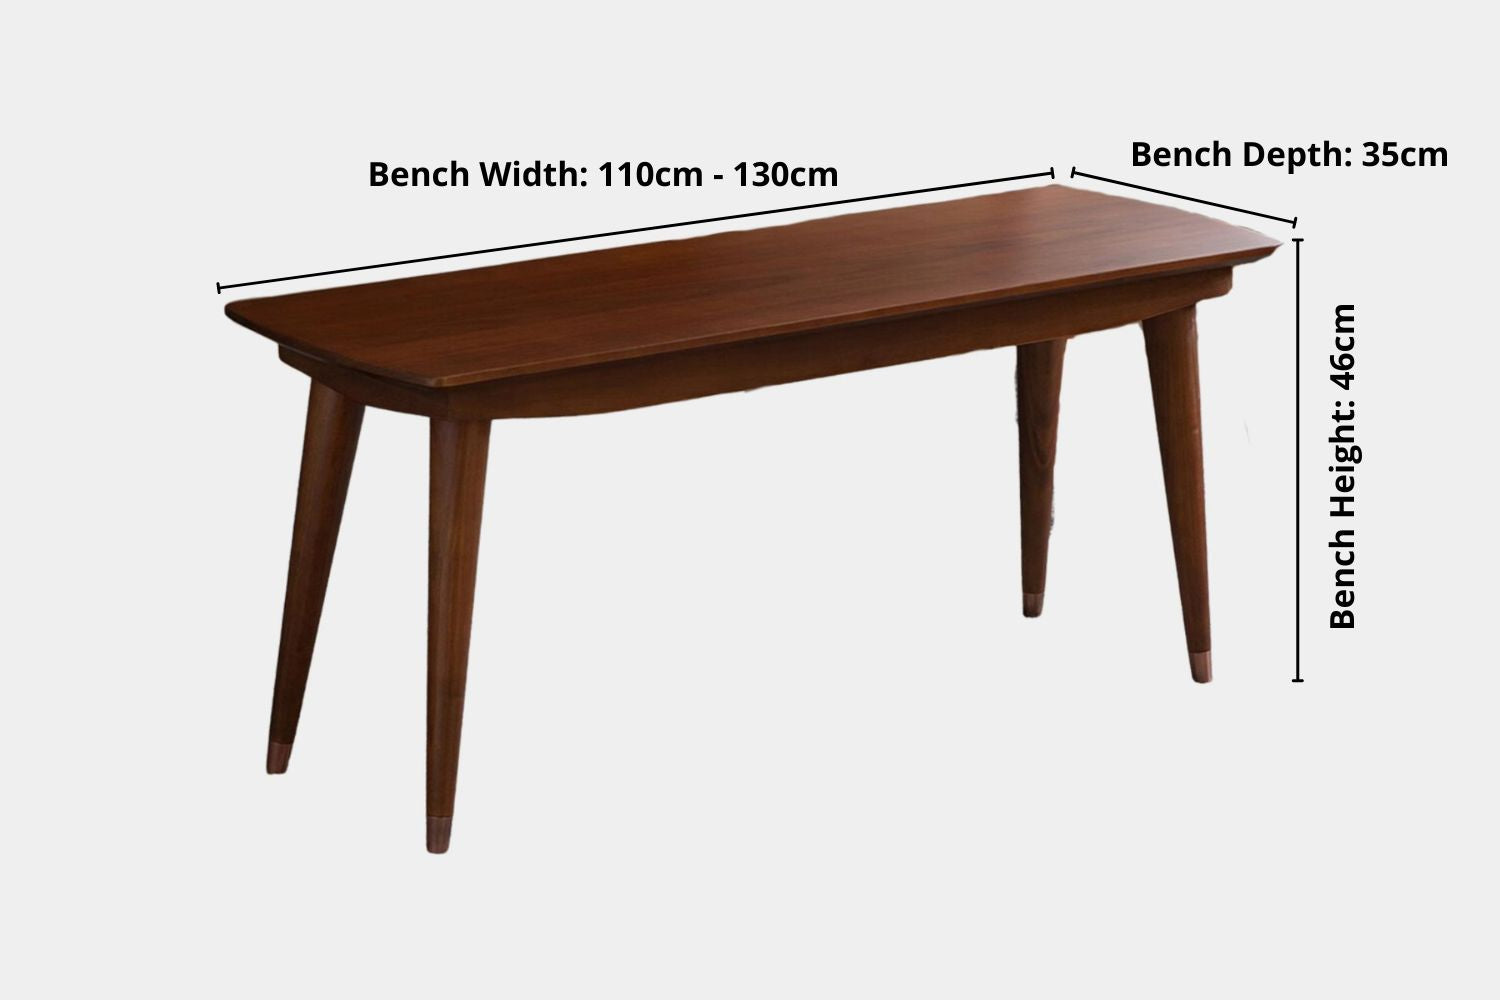 Key product dimensions such as depth, width and height for Tate Poplar Wood Bench